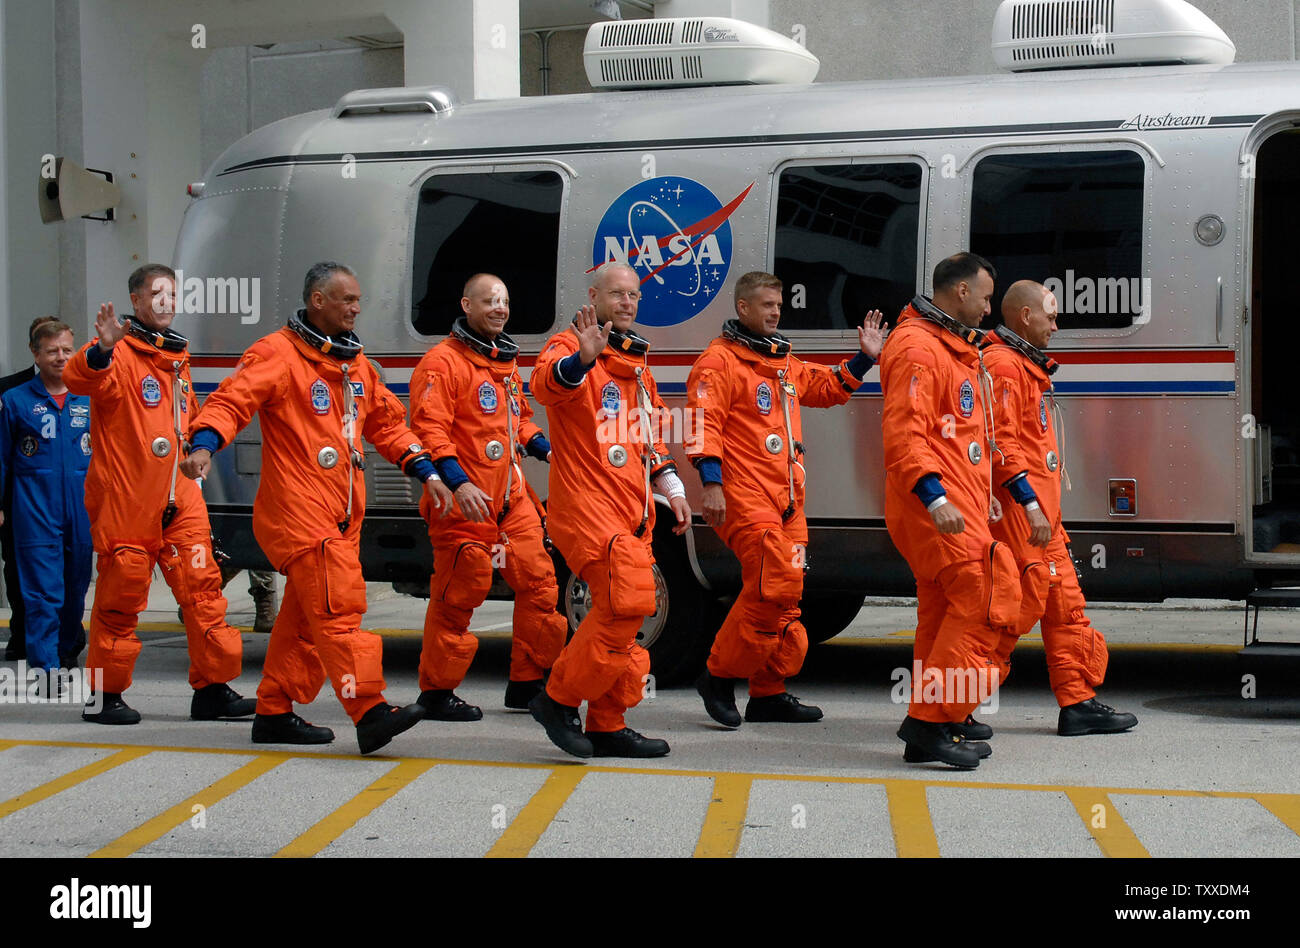 Commander Fred Sturckow (R), leading STS-117 crew members (R to L) Lee Archambault, Steven Swanson, Patrick Forrester, Clay Anderson, John Olivas and James Reilly walk out from the O&C Building at 3:45 PM at the Kennedy Space Center, Florida on June 8, 2007. NASA is making final preparations to launch the shuttle Atlantis at 7:38 PM. Atlantis will fly an eleven day mission to the International Space Station.(UPI Photo/Joe Marino-Bill Cantrell) Stock Photo